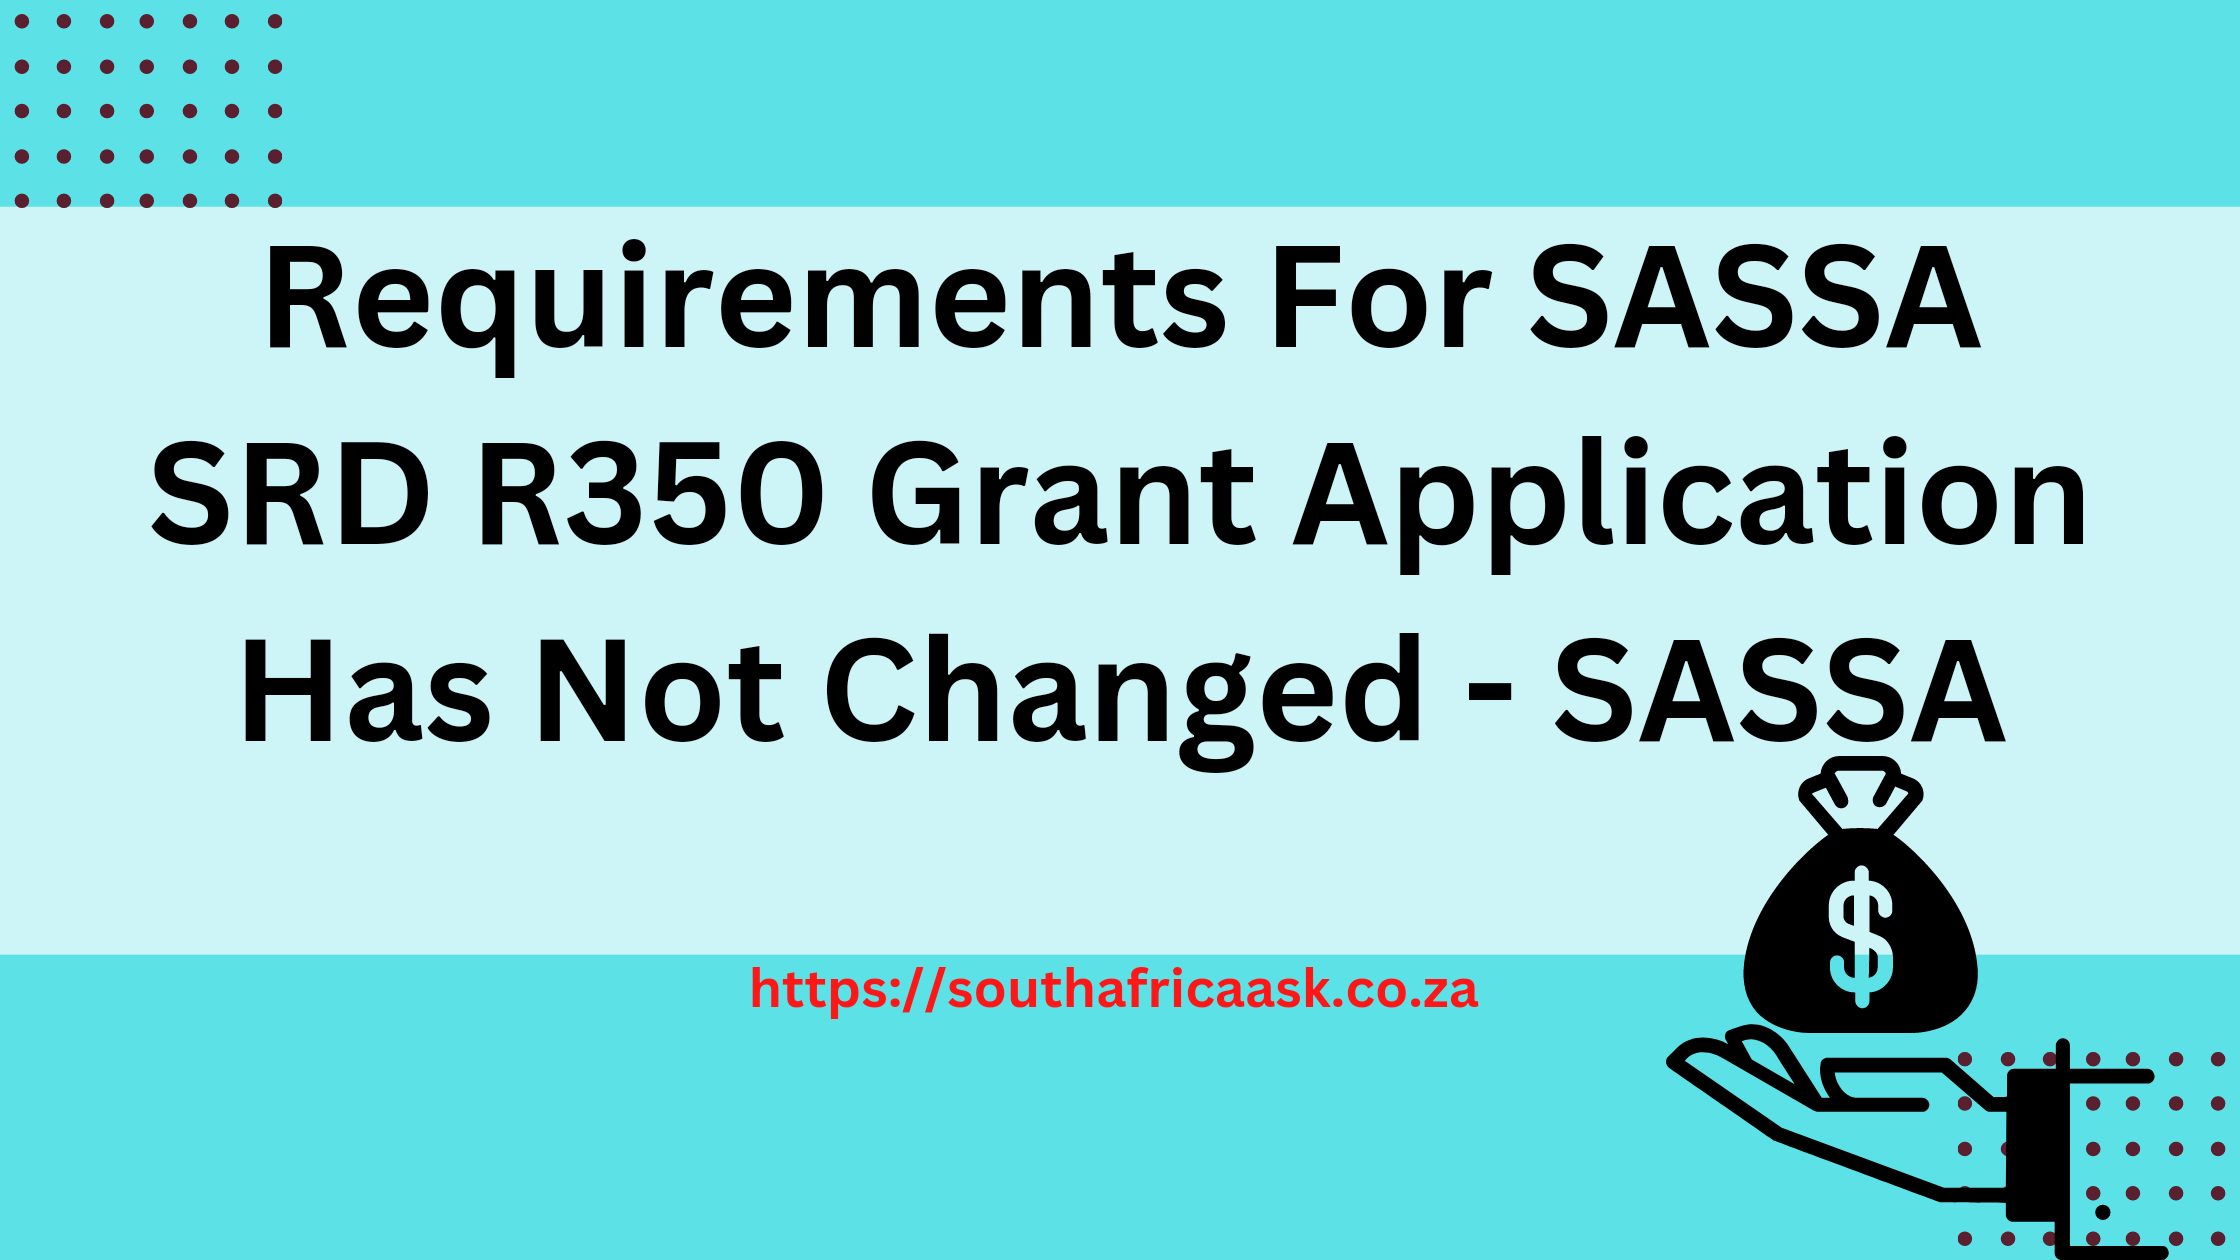 Requirements For SASSA SRD R350 Grant Application Has Not Changed - SASSA